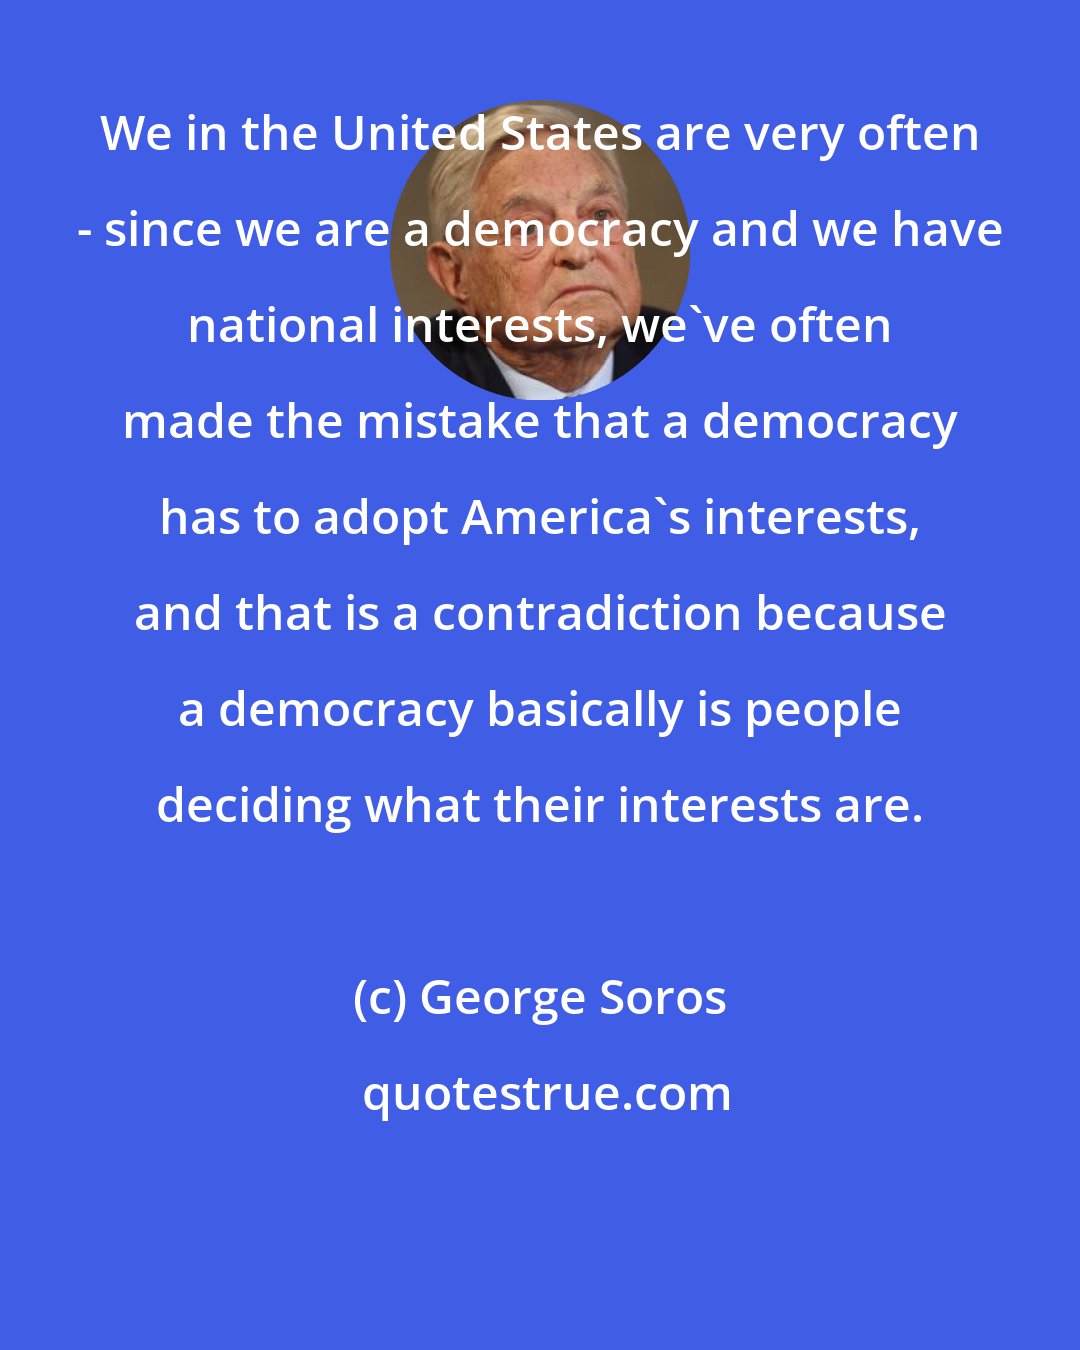 George Soros: We in the United States are very often - since we are a democracy and we have national interests, we've often made the mistake that a democracy has to adopt America's interests, and that is a contradiction because a democracy basically is people deciding what their interests are.